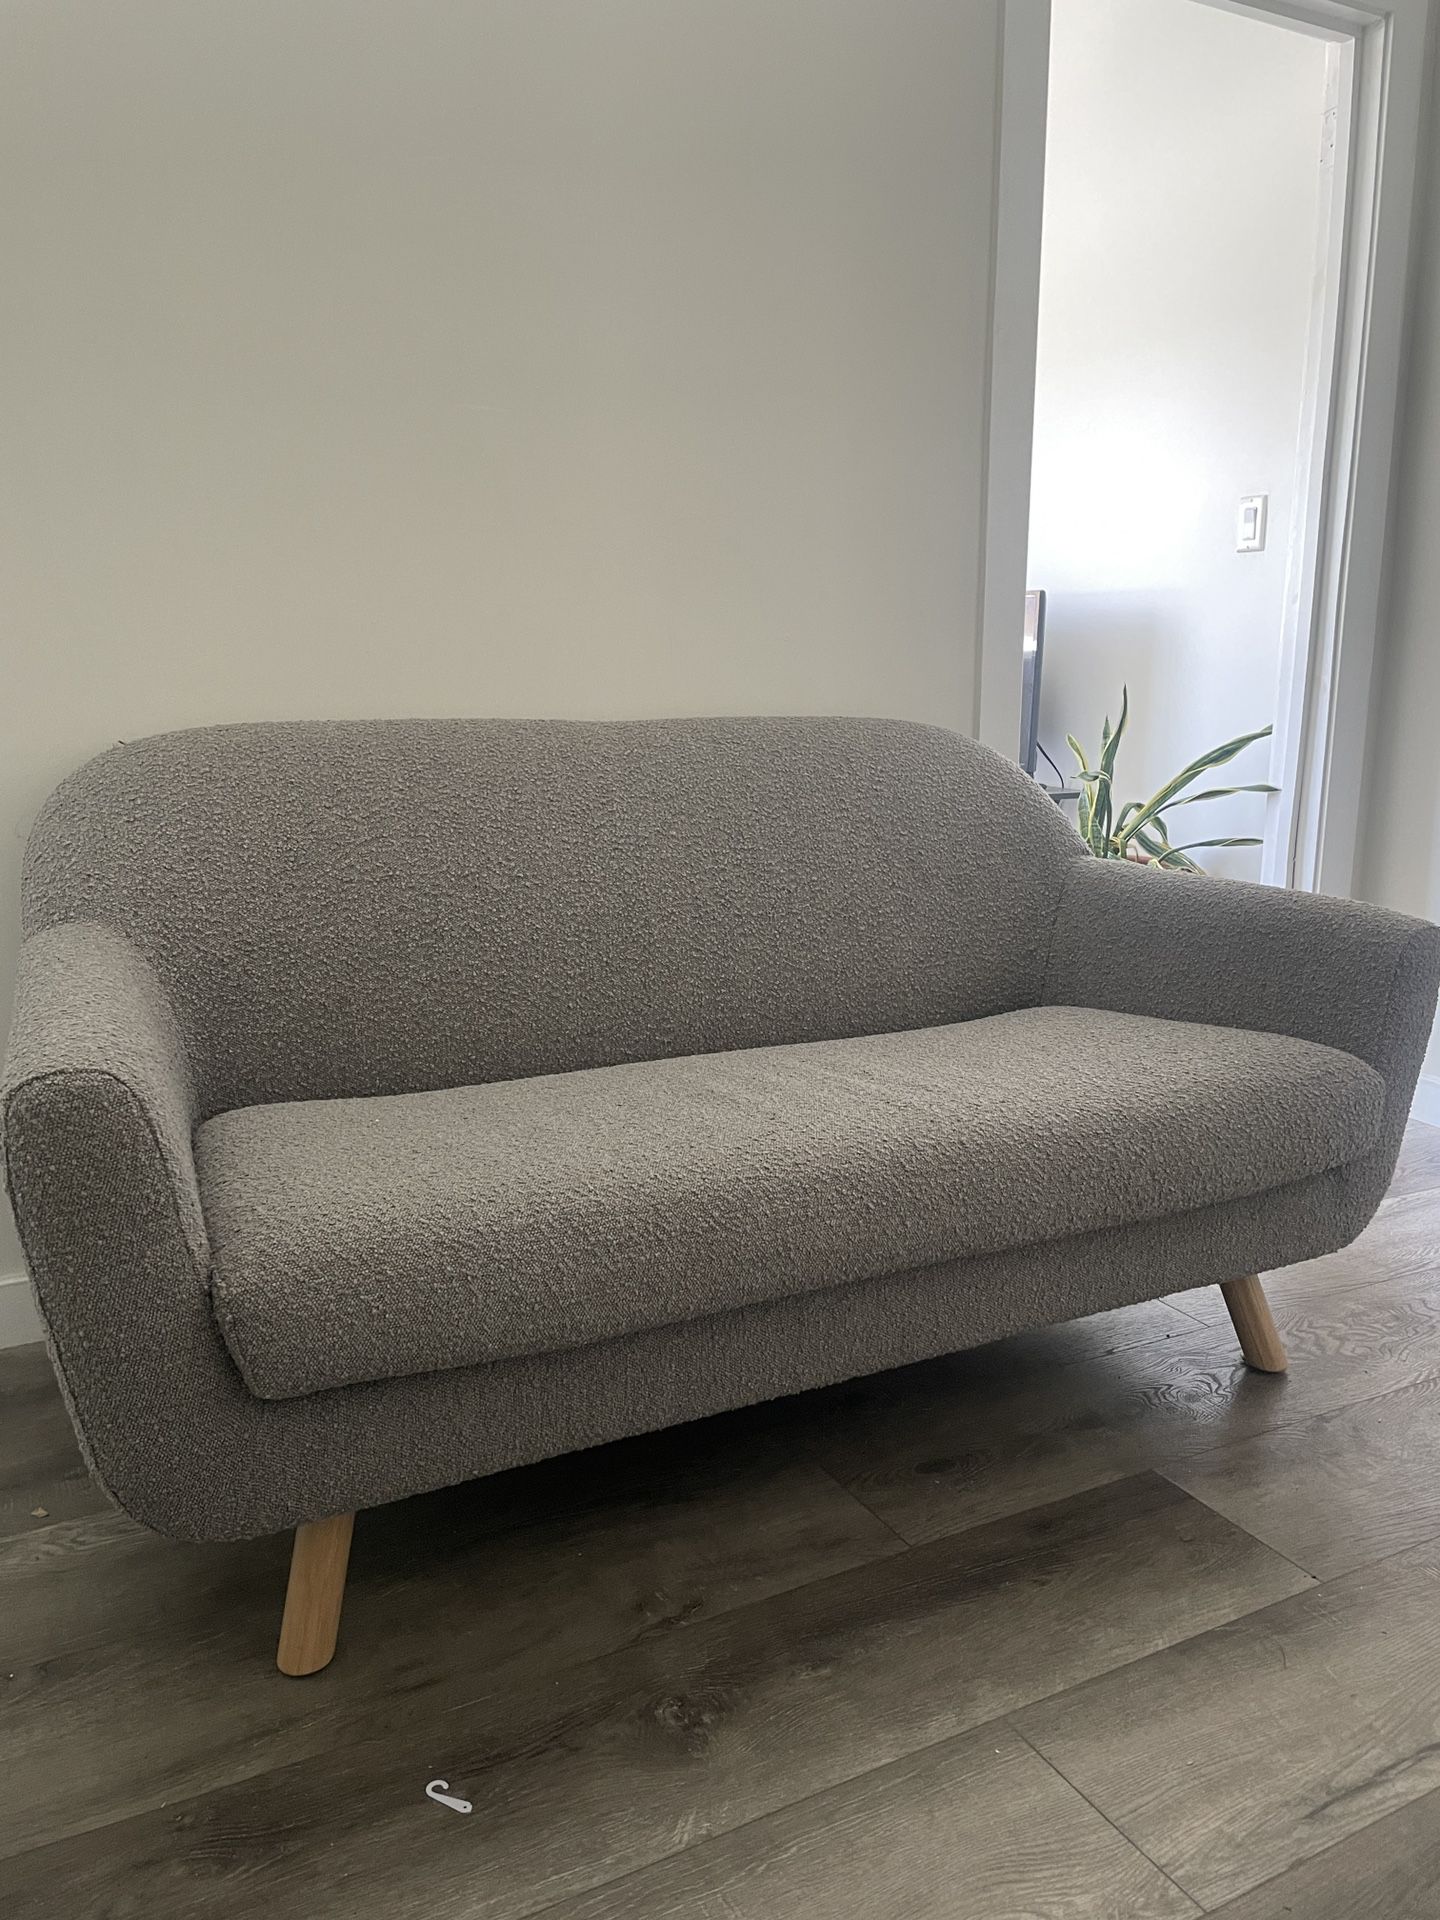 Article Bouclé Small Couch / Loveseat 